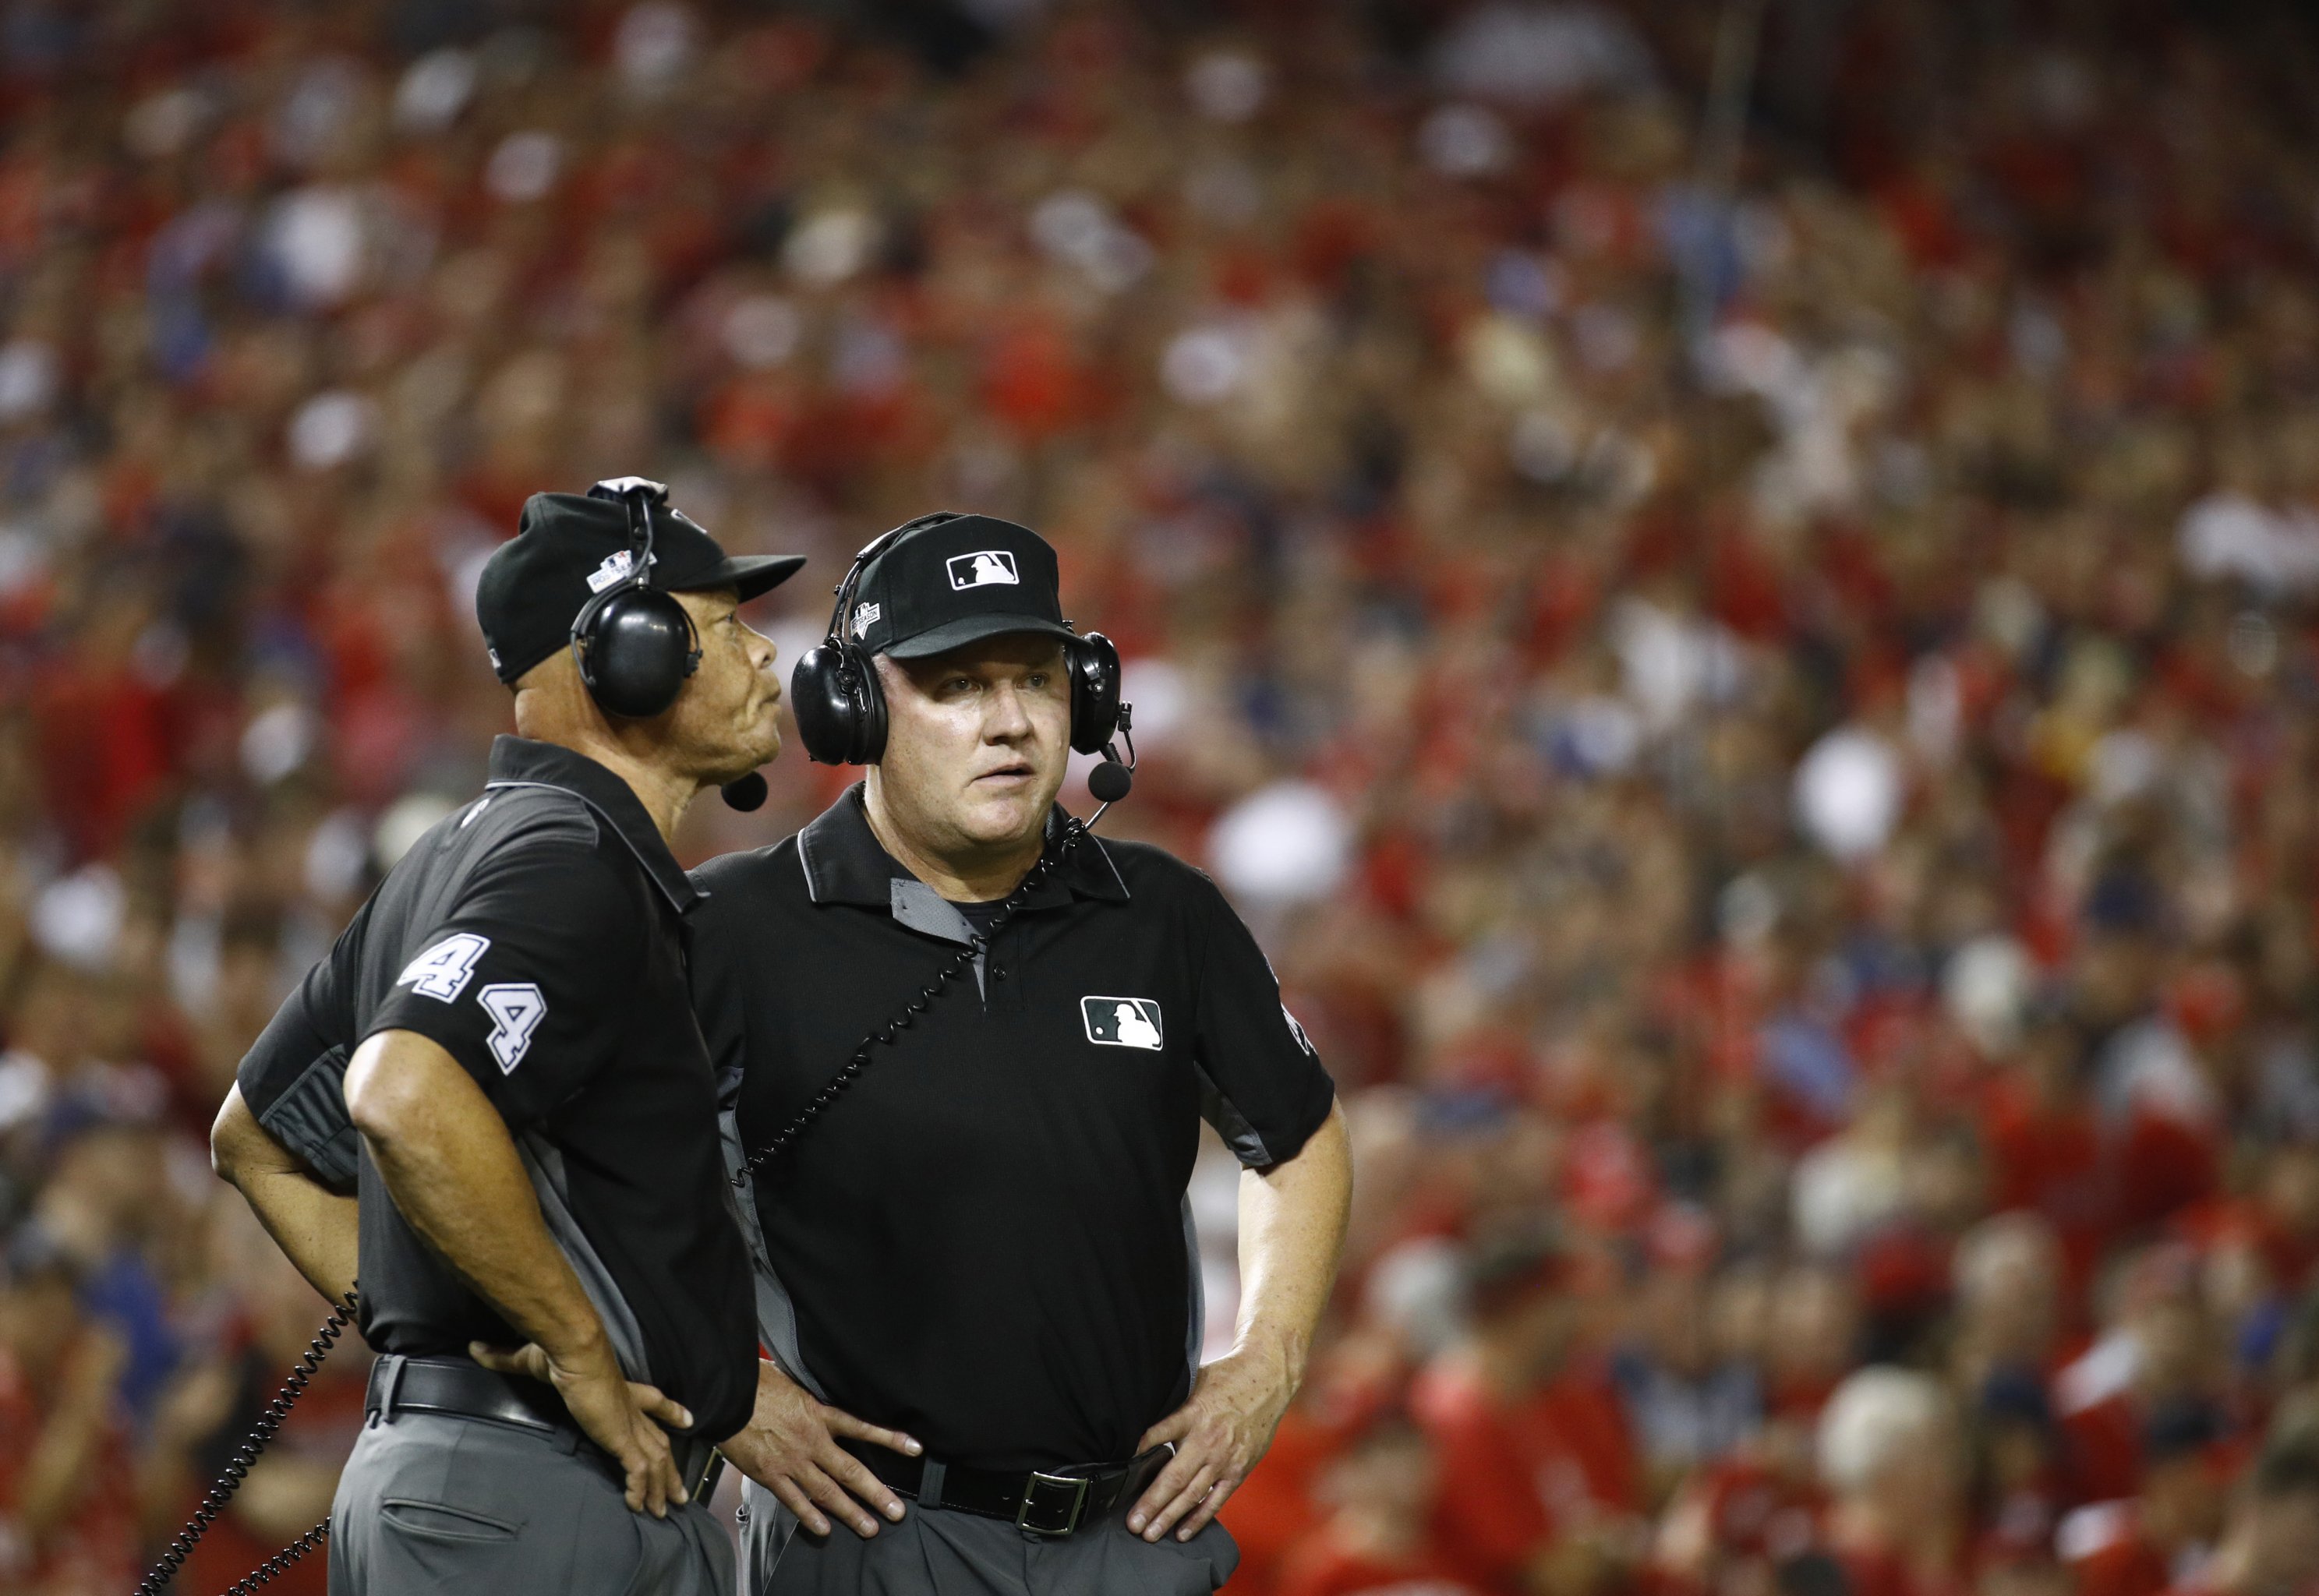 MLB Fans Threaten to Boycott Over 'Robot Umpires'—'Will Ruin the Game